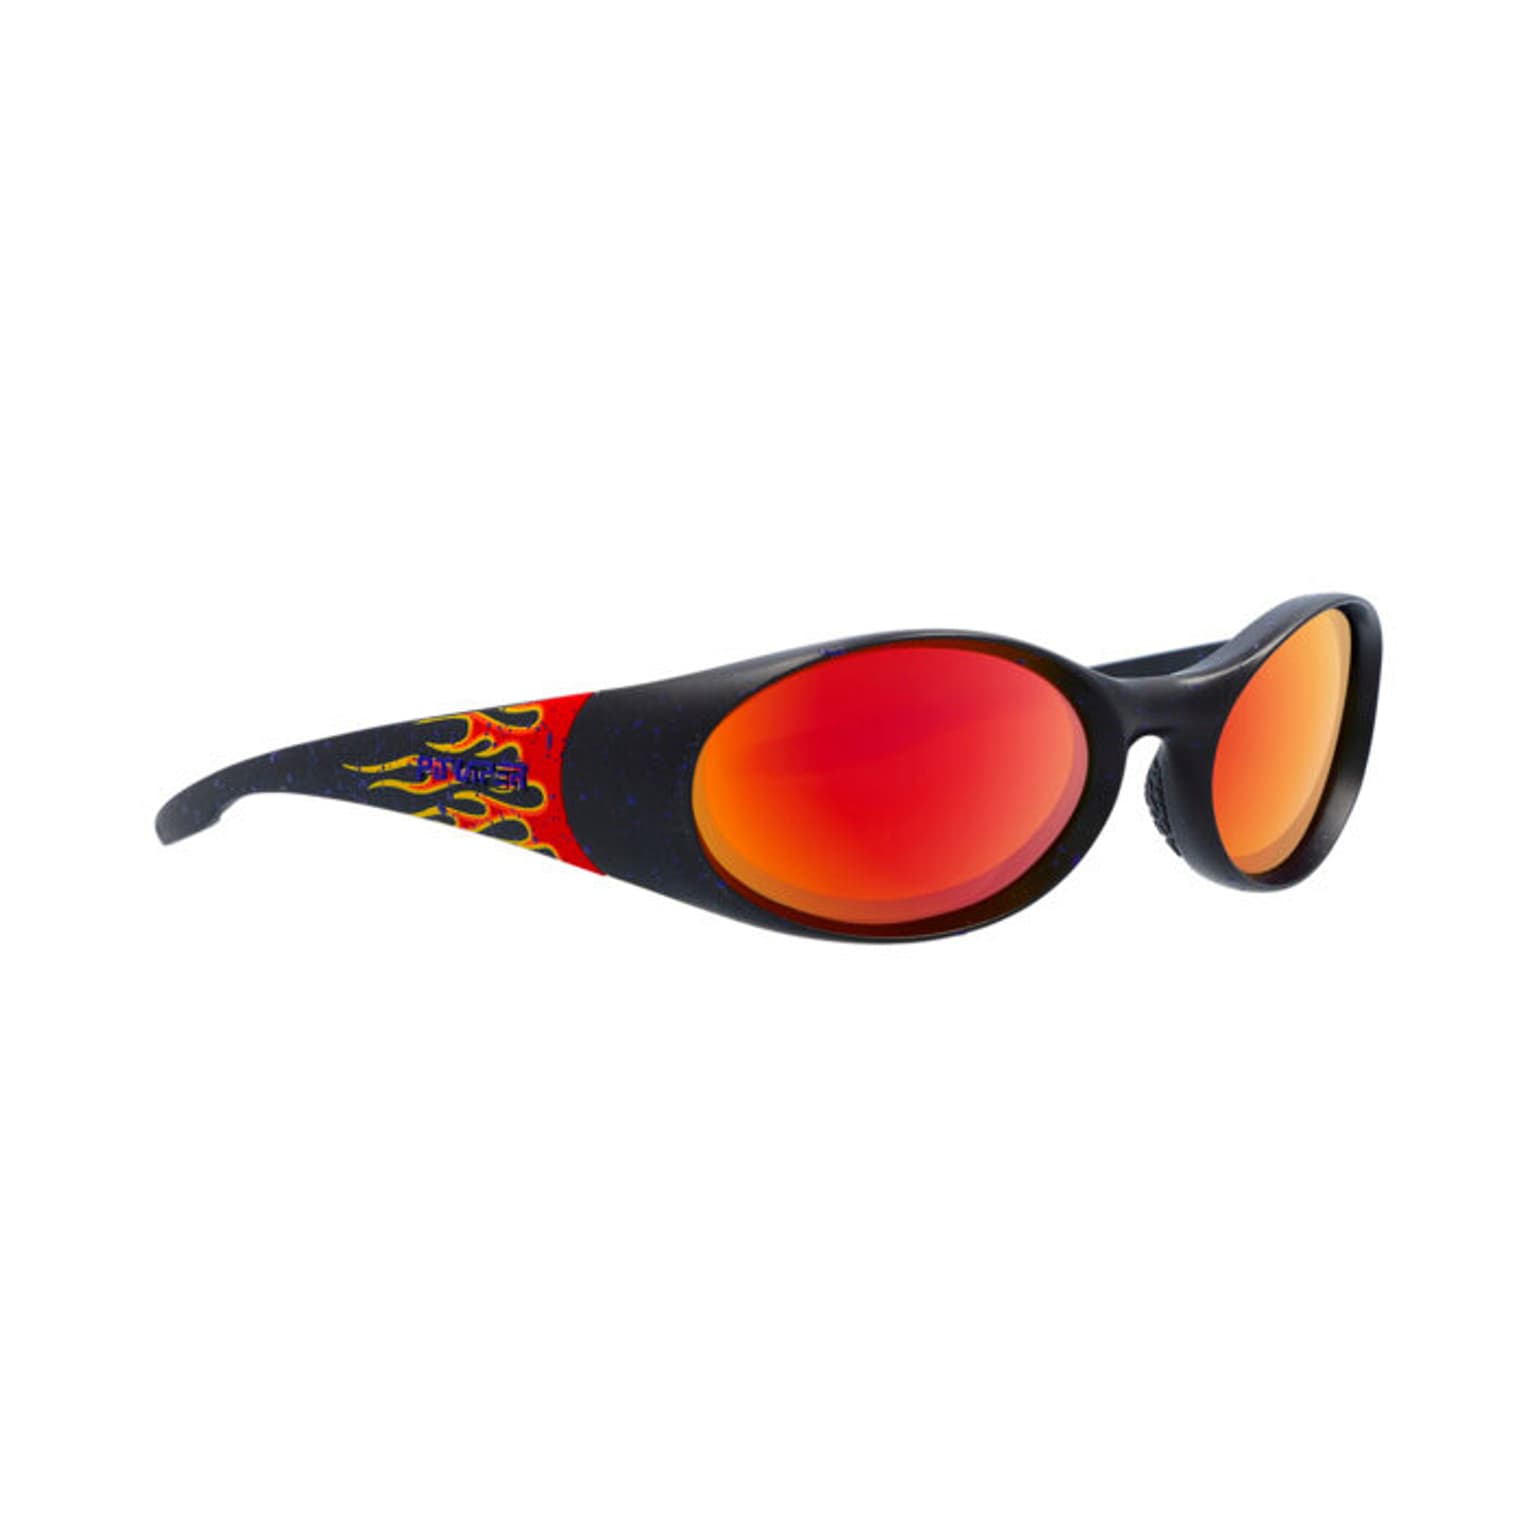 Pit Viper Pit Viper The Slammer The Combustion Sportbrille 1